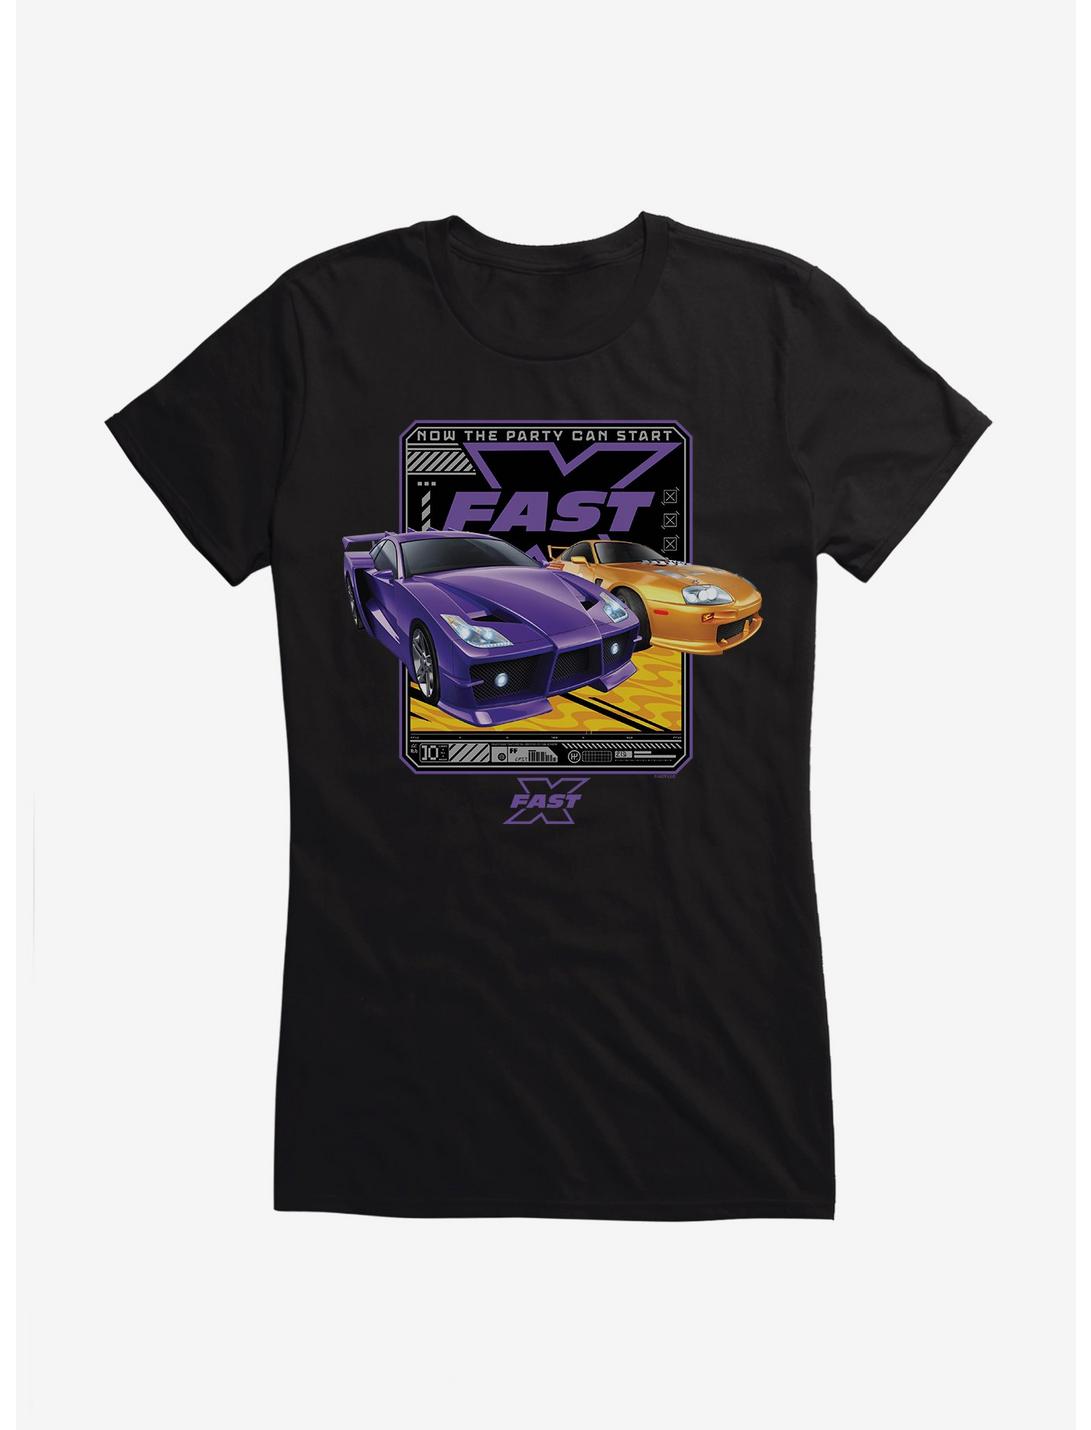 Fast X Now The Party Can Start Girls T-Shirt, , hi-res